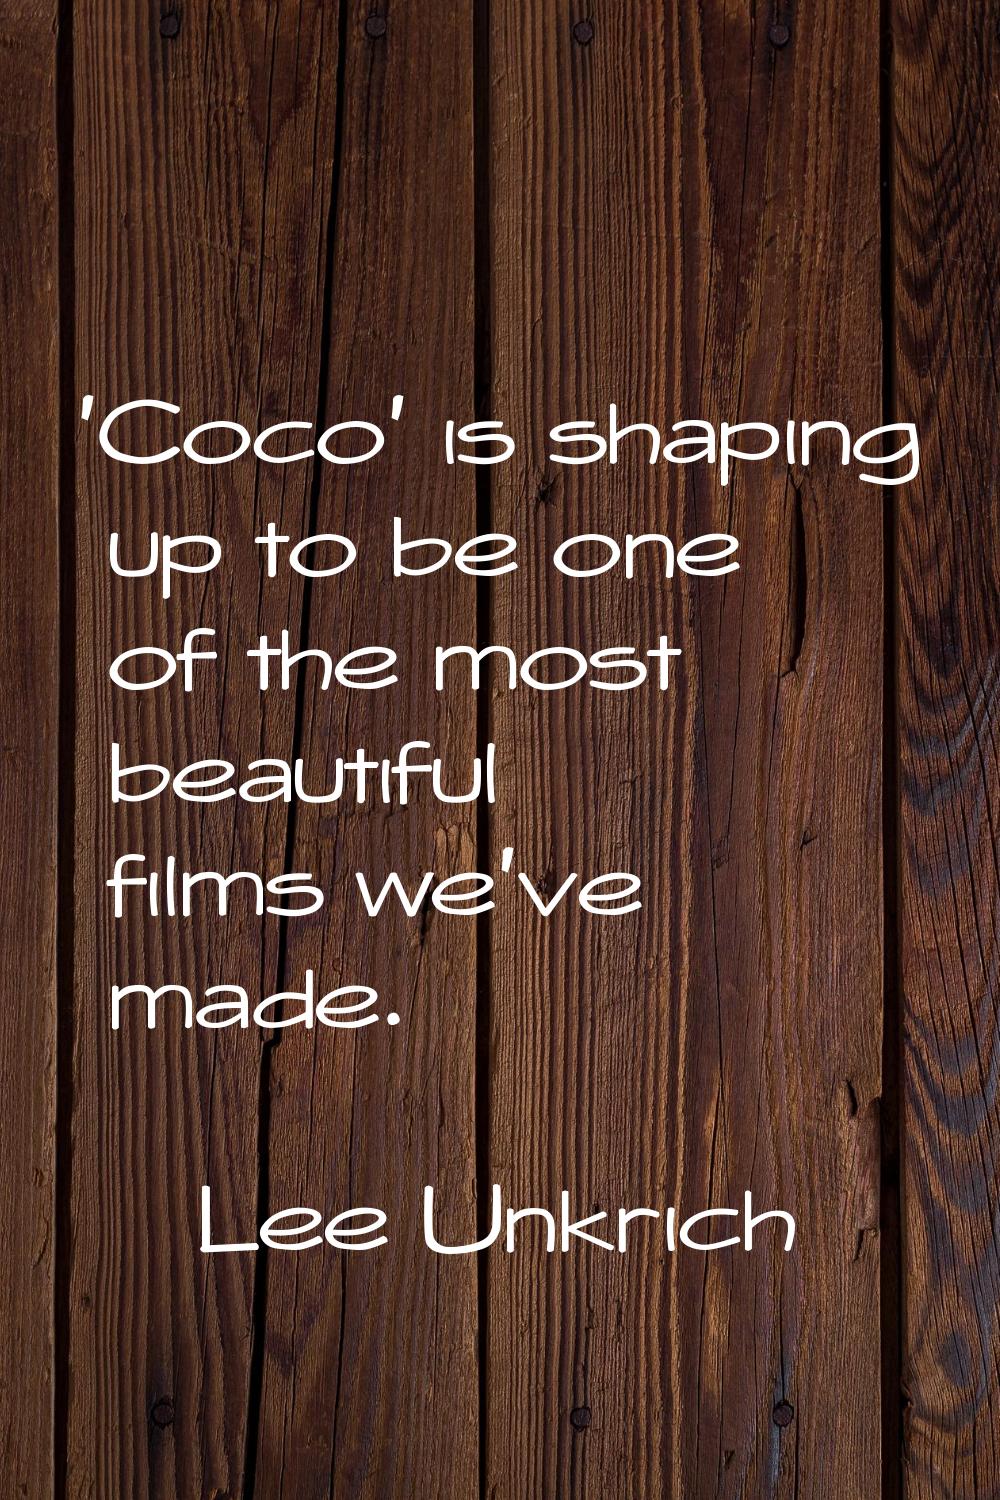 'Coco' is shaping up to be one of the most beautiful films we've made.